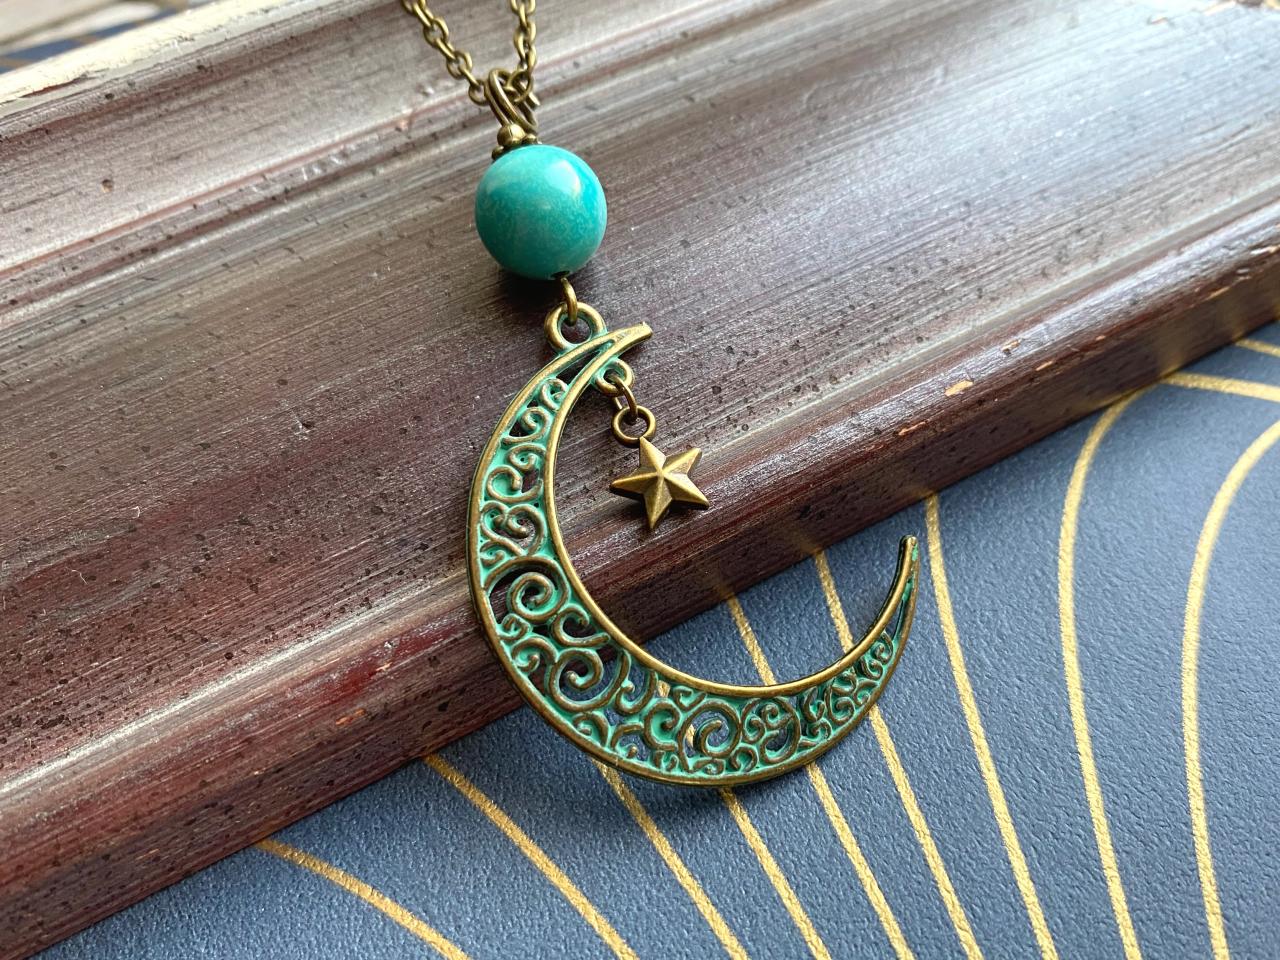 Celestial Necklace With A Turquoise Gemstone Pearl, Selma Dreams